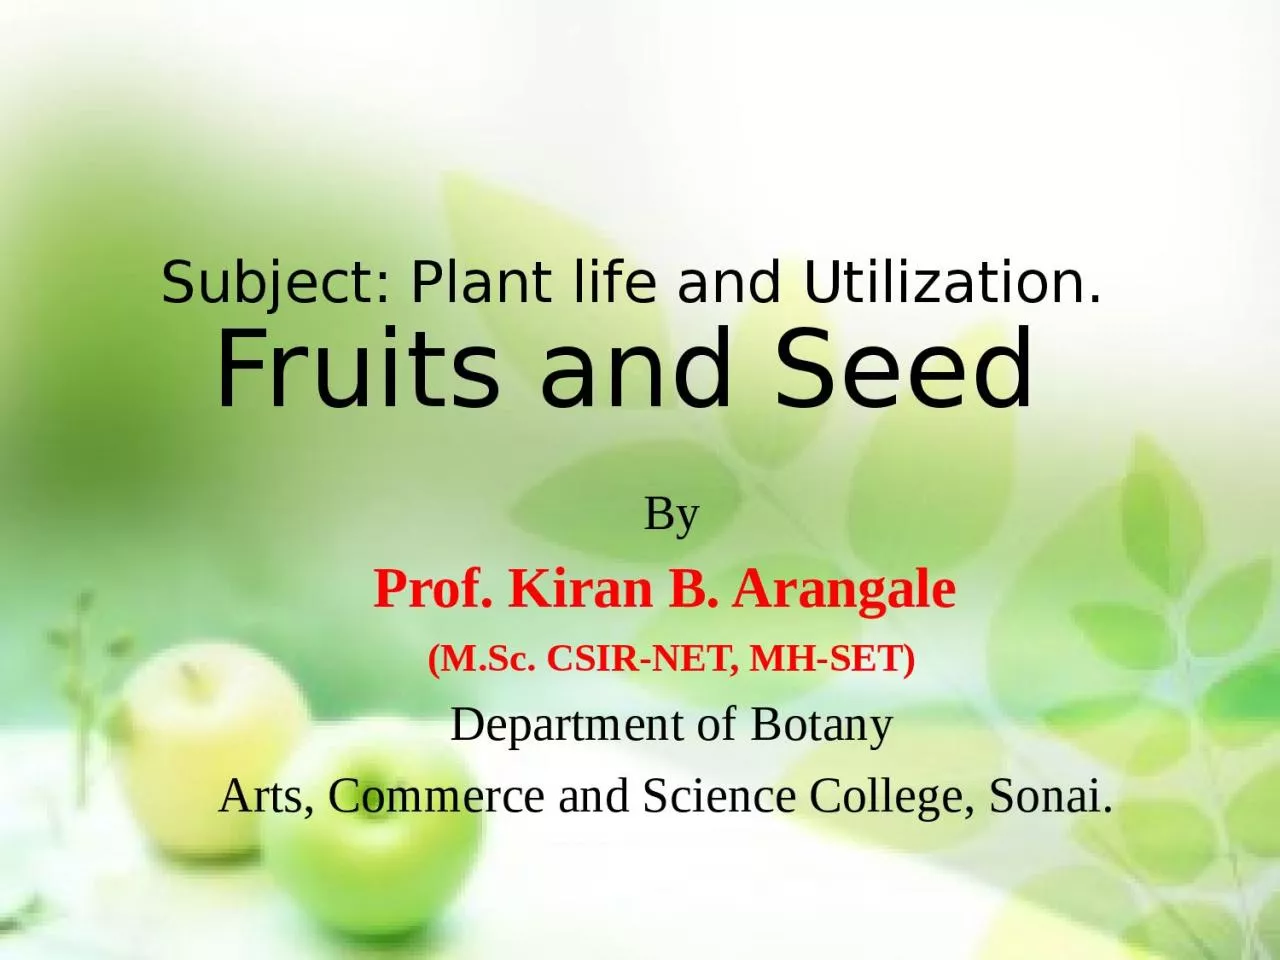 Subject: Plant life and Utilization.